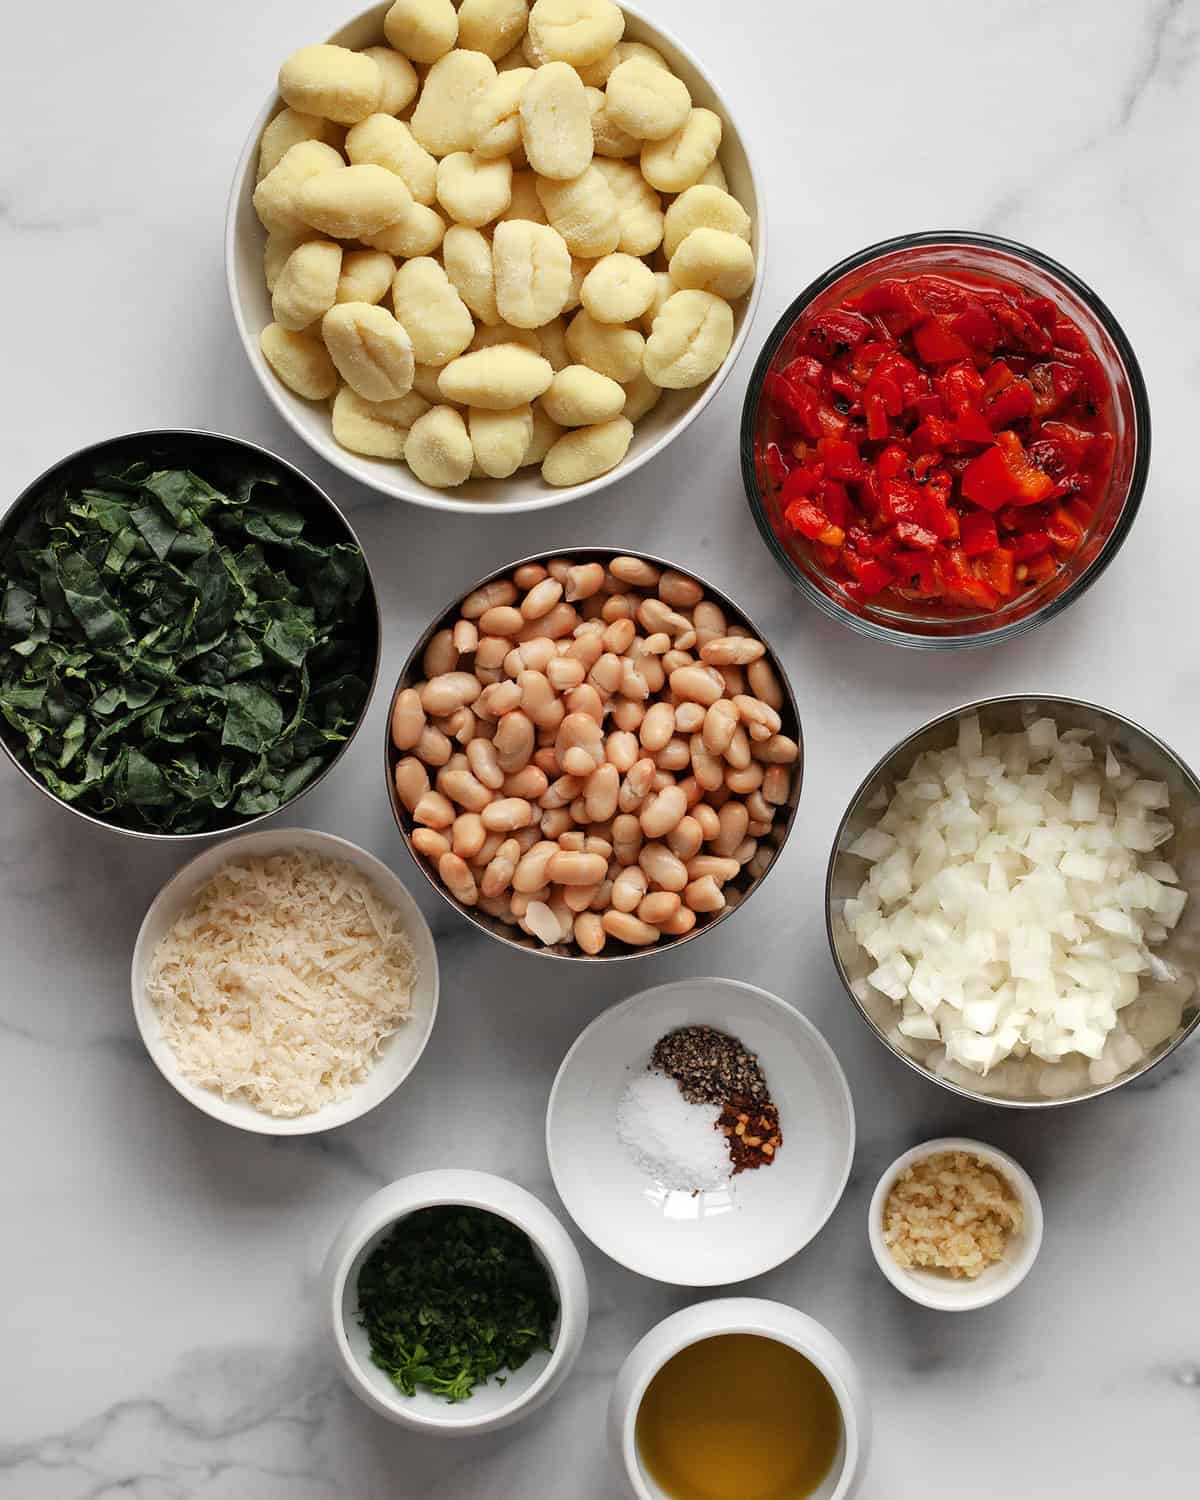 Ingredients including gnocchi, white beans, red peppers, kale, olive oil, onions, parmesan and spices.